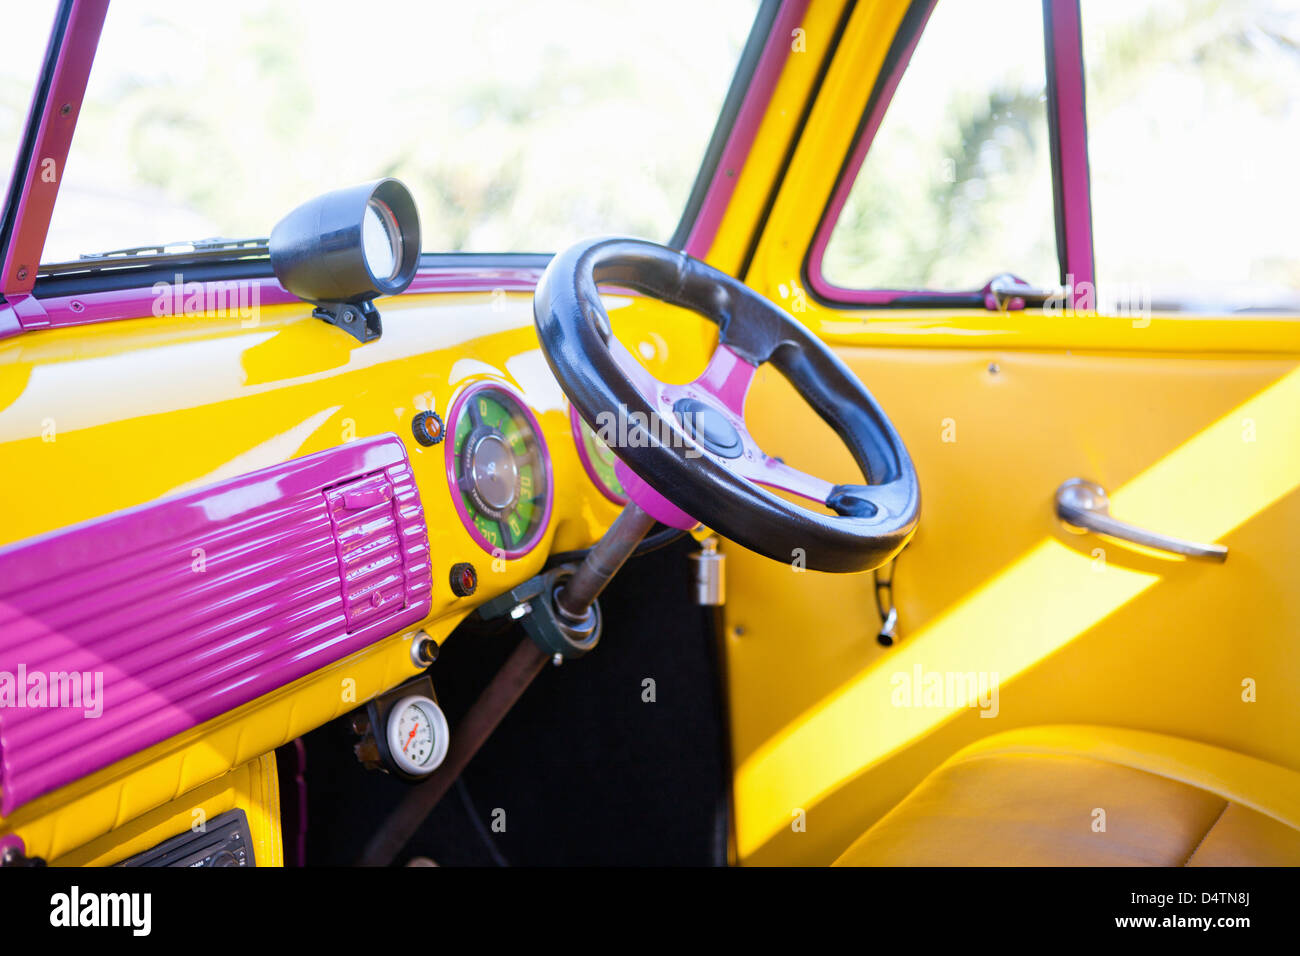 Steering wheel of colorful car Stock Photo